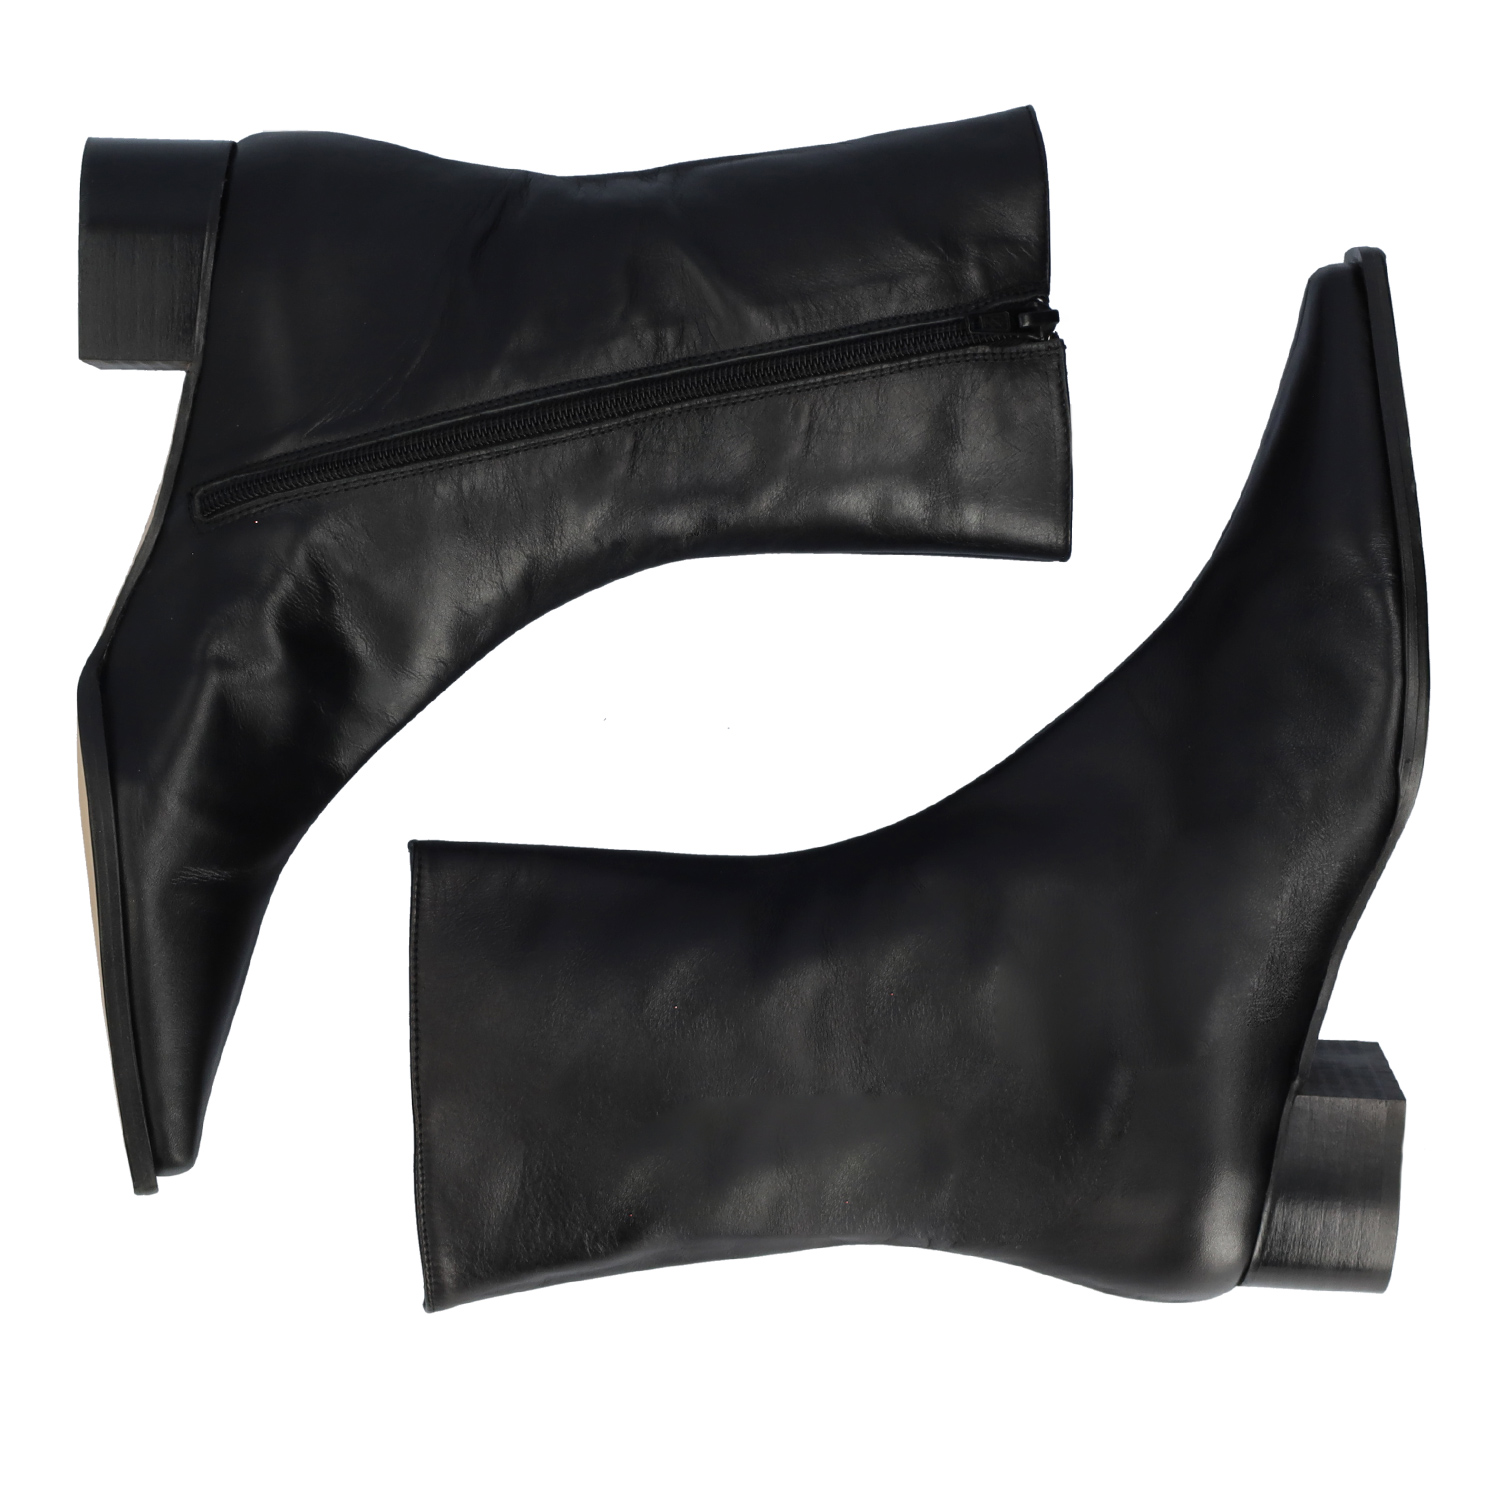 Heeled booties in black leather 